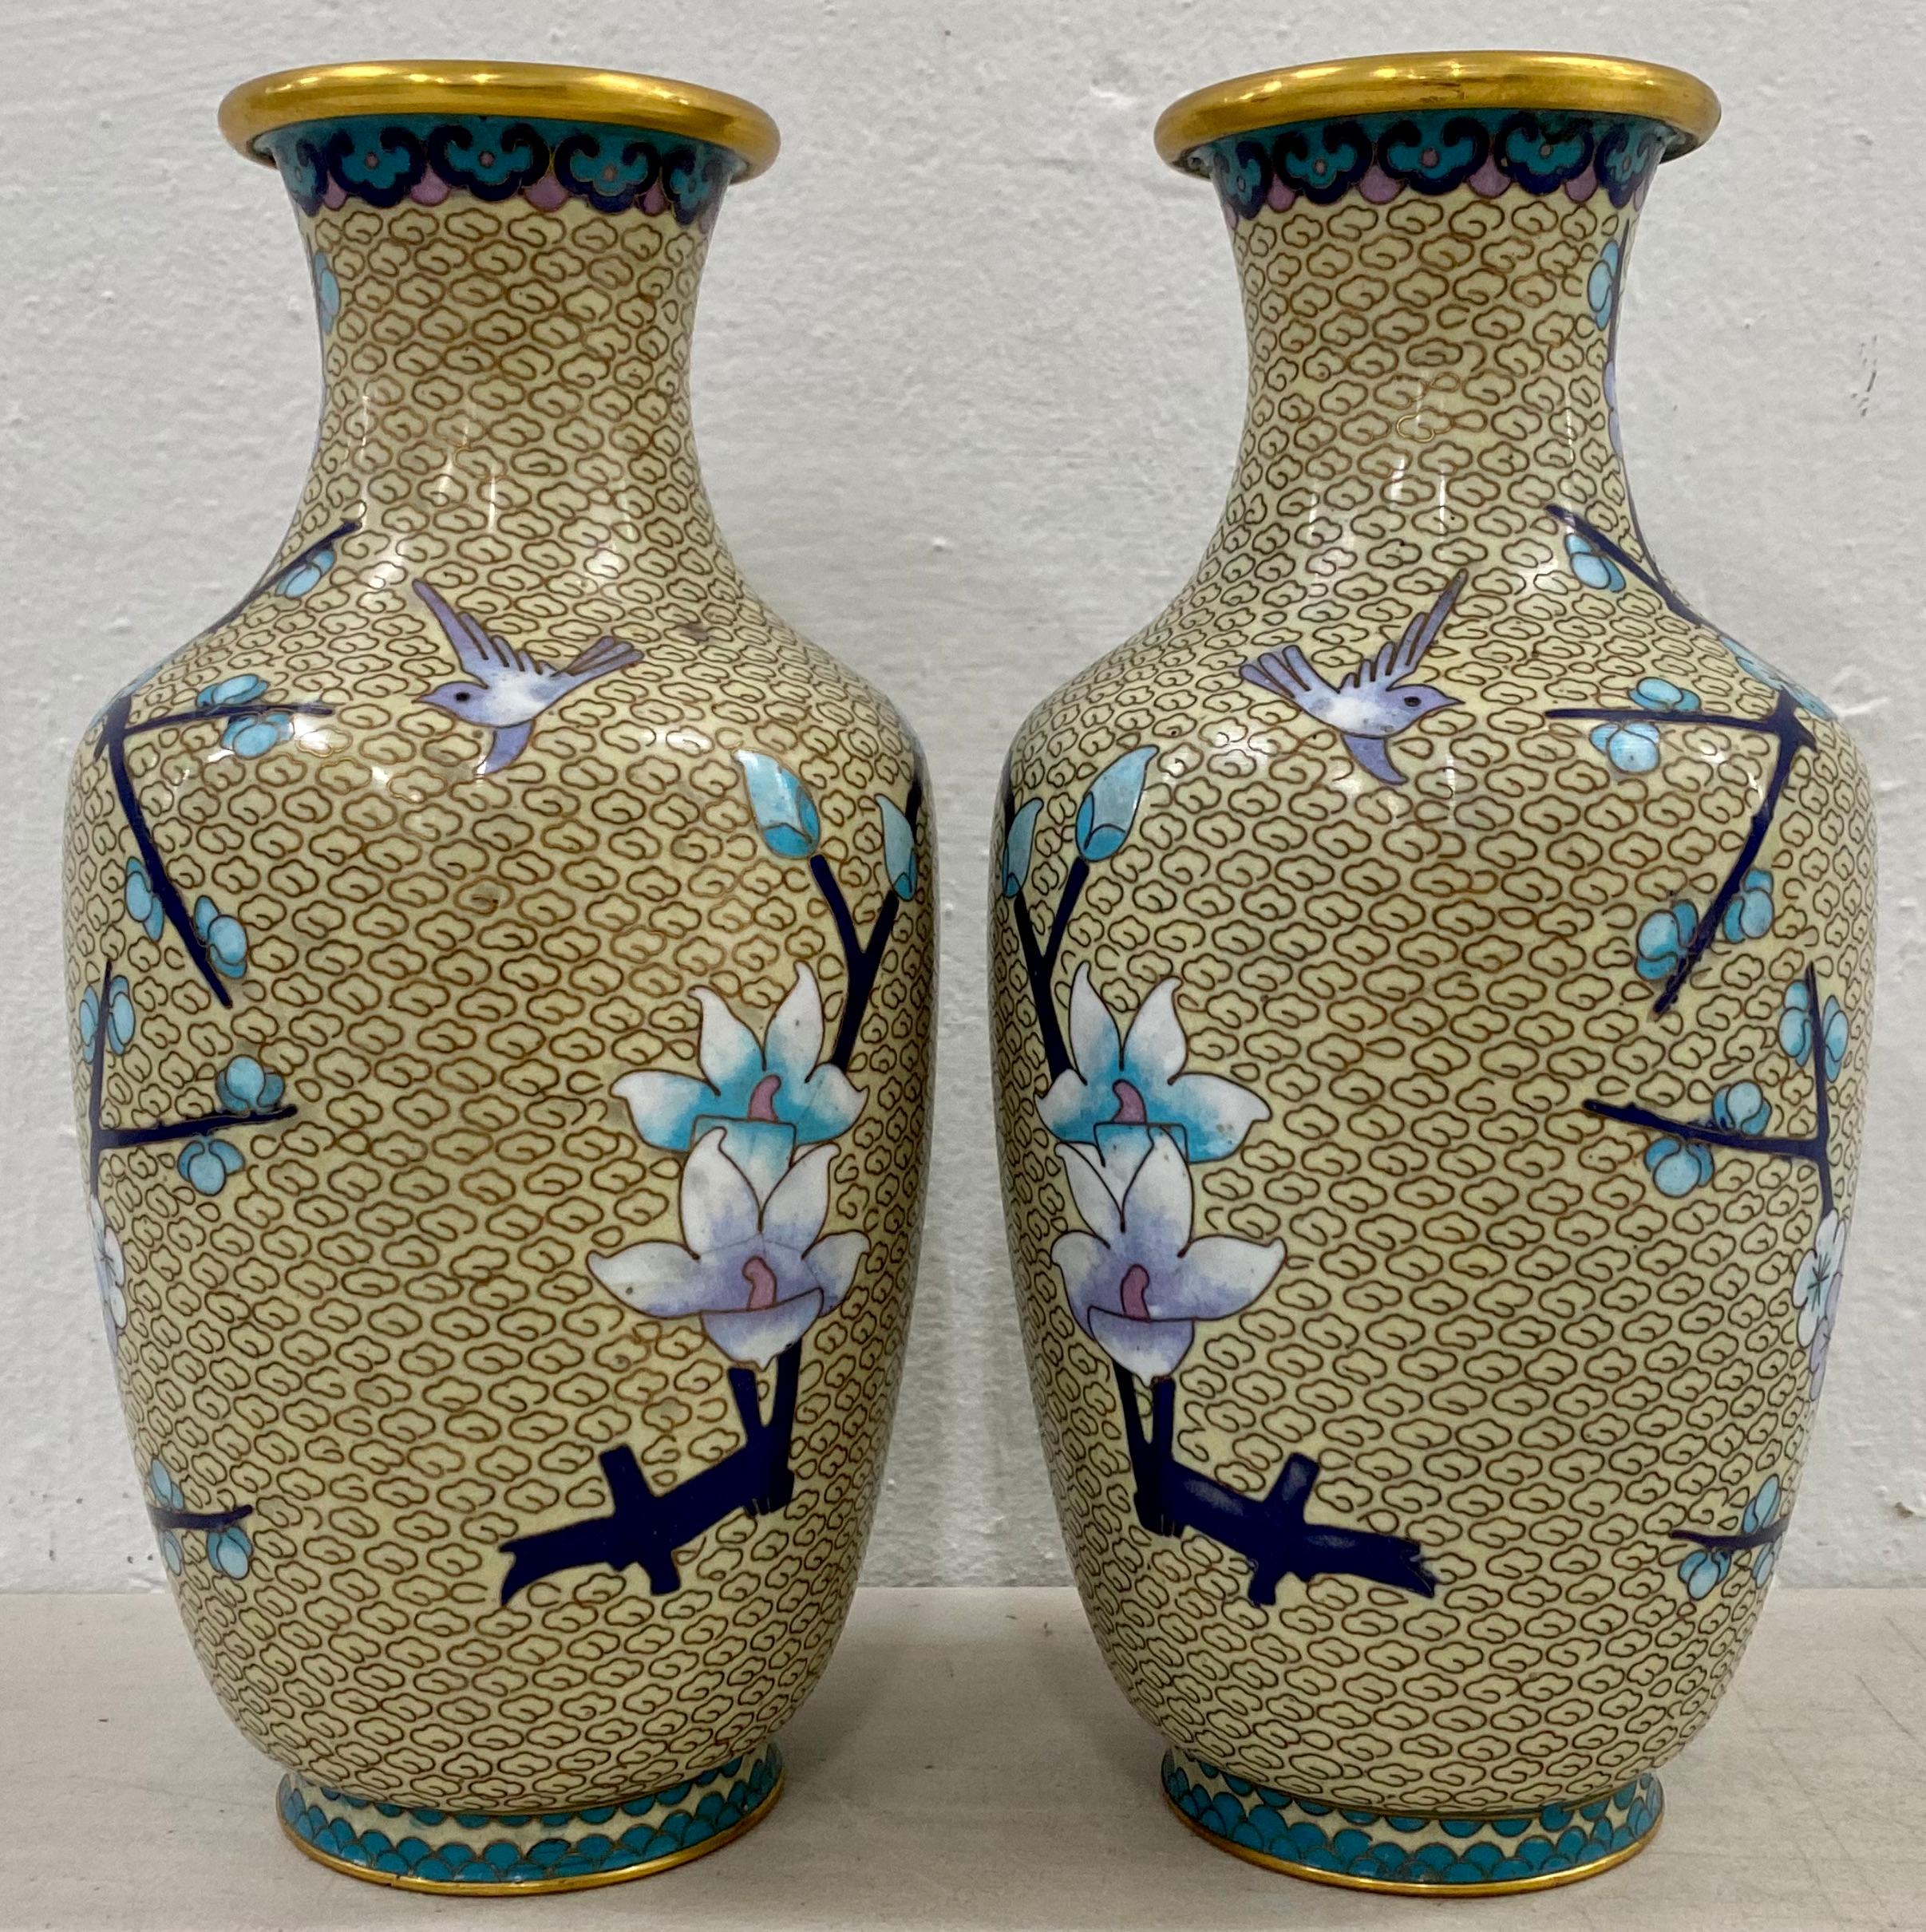 Chinese Export Cloisonne Vases, a Pair, Early to Mid 20th Century For Sale